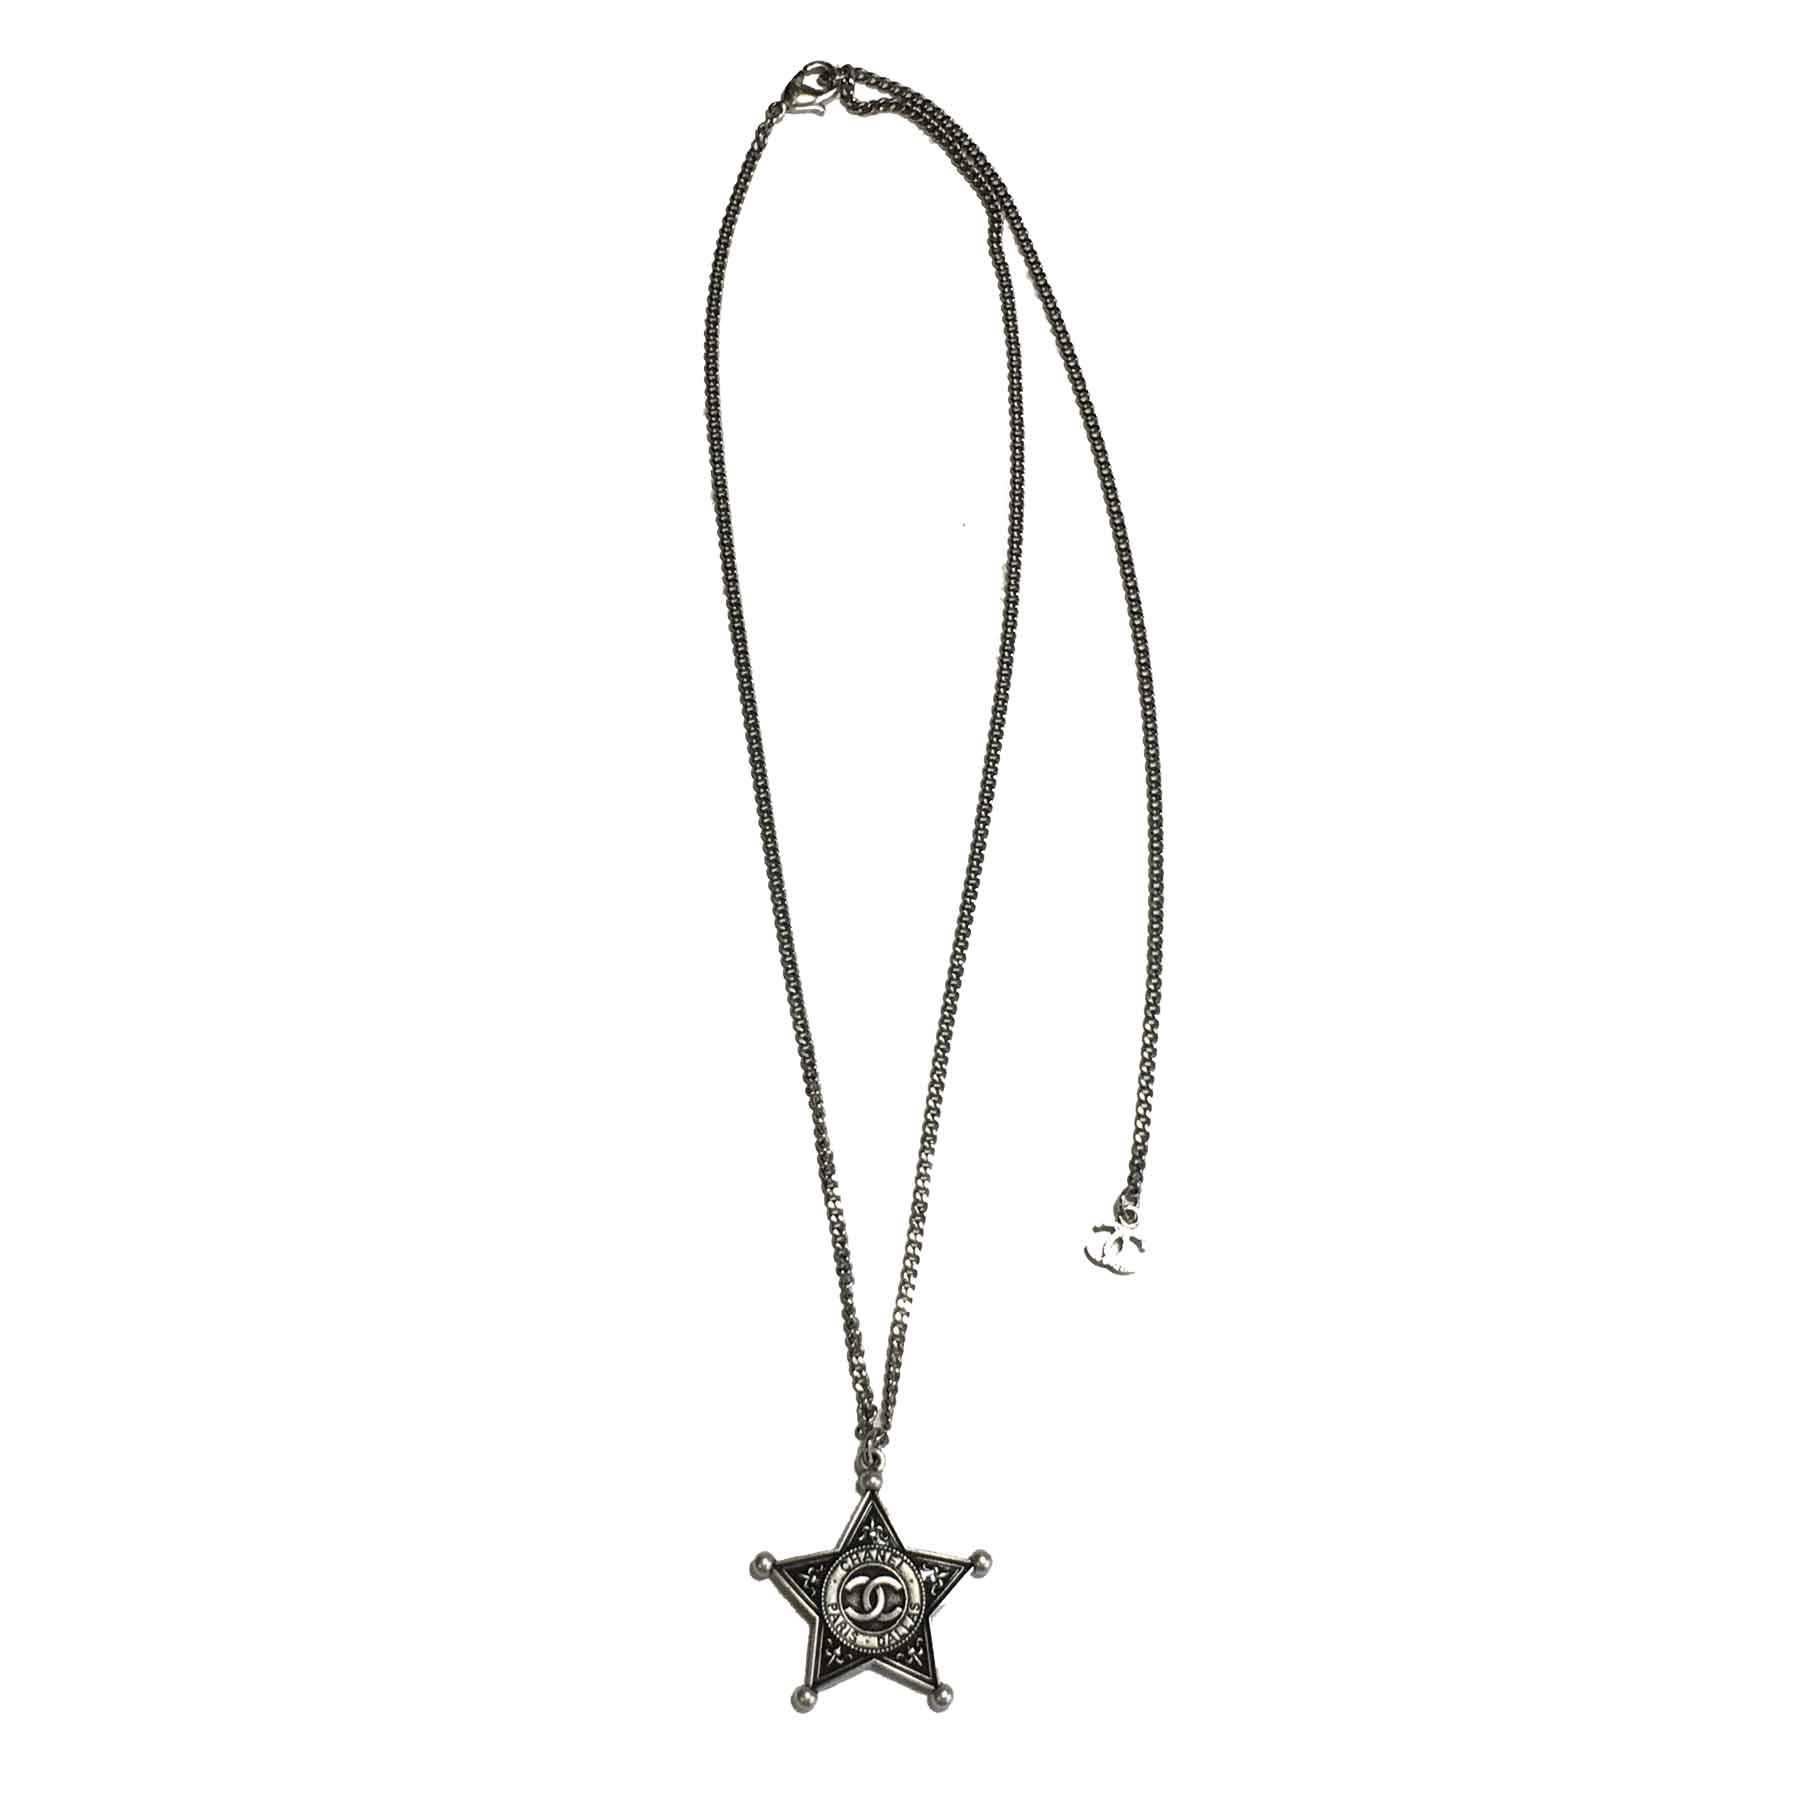 Chanel necklace from the collection of "Paris Dallas" Métiers d'Art collection in silver plated metal. Sterling star pendant.

New condition. Collection Fall / Winter 2014

Dimensions: total length: 61 cm, at the first ring: 42 cm, at the